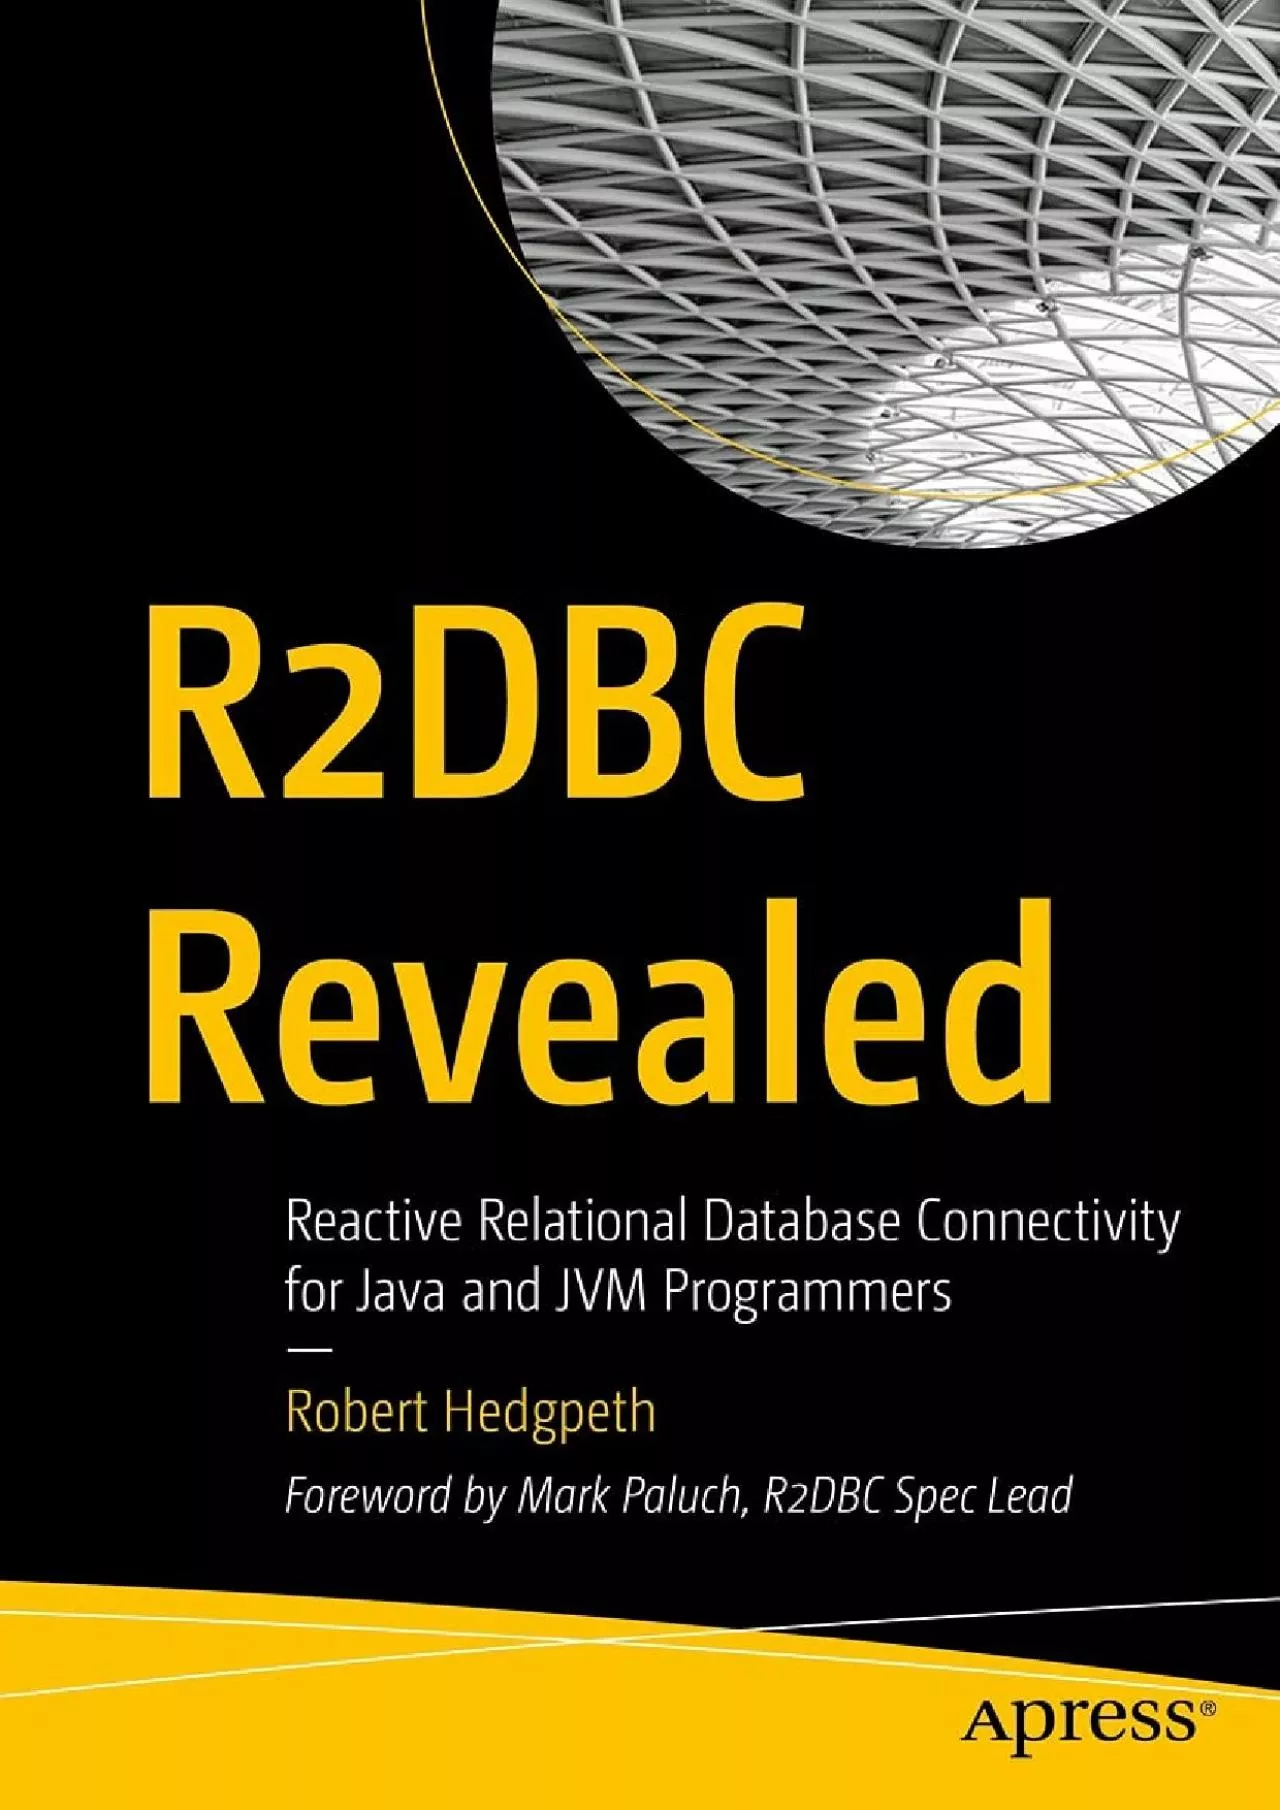 [BEST]-R2DBC Revealed: Reactive Relational Database Connectivity for Java and JVM Programmers